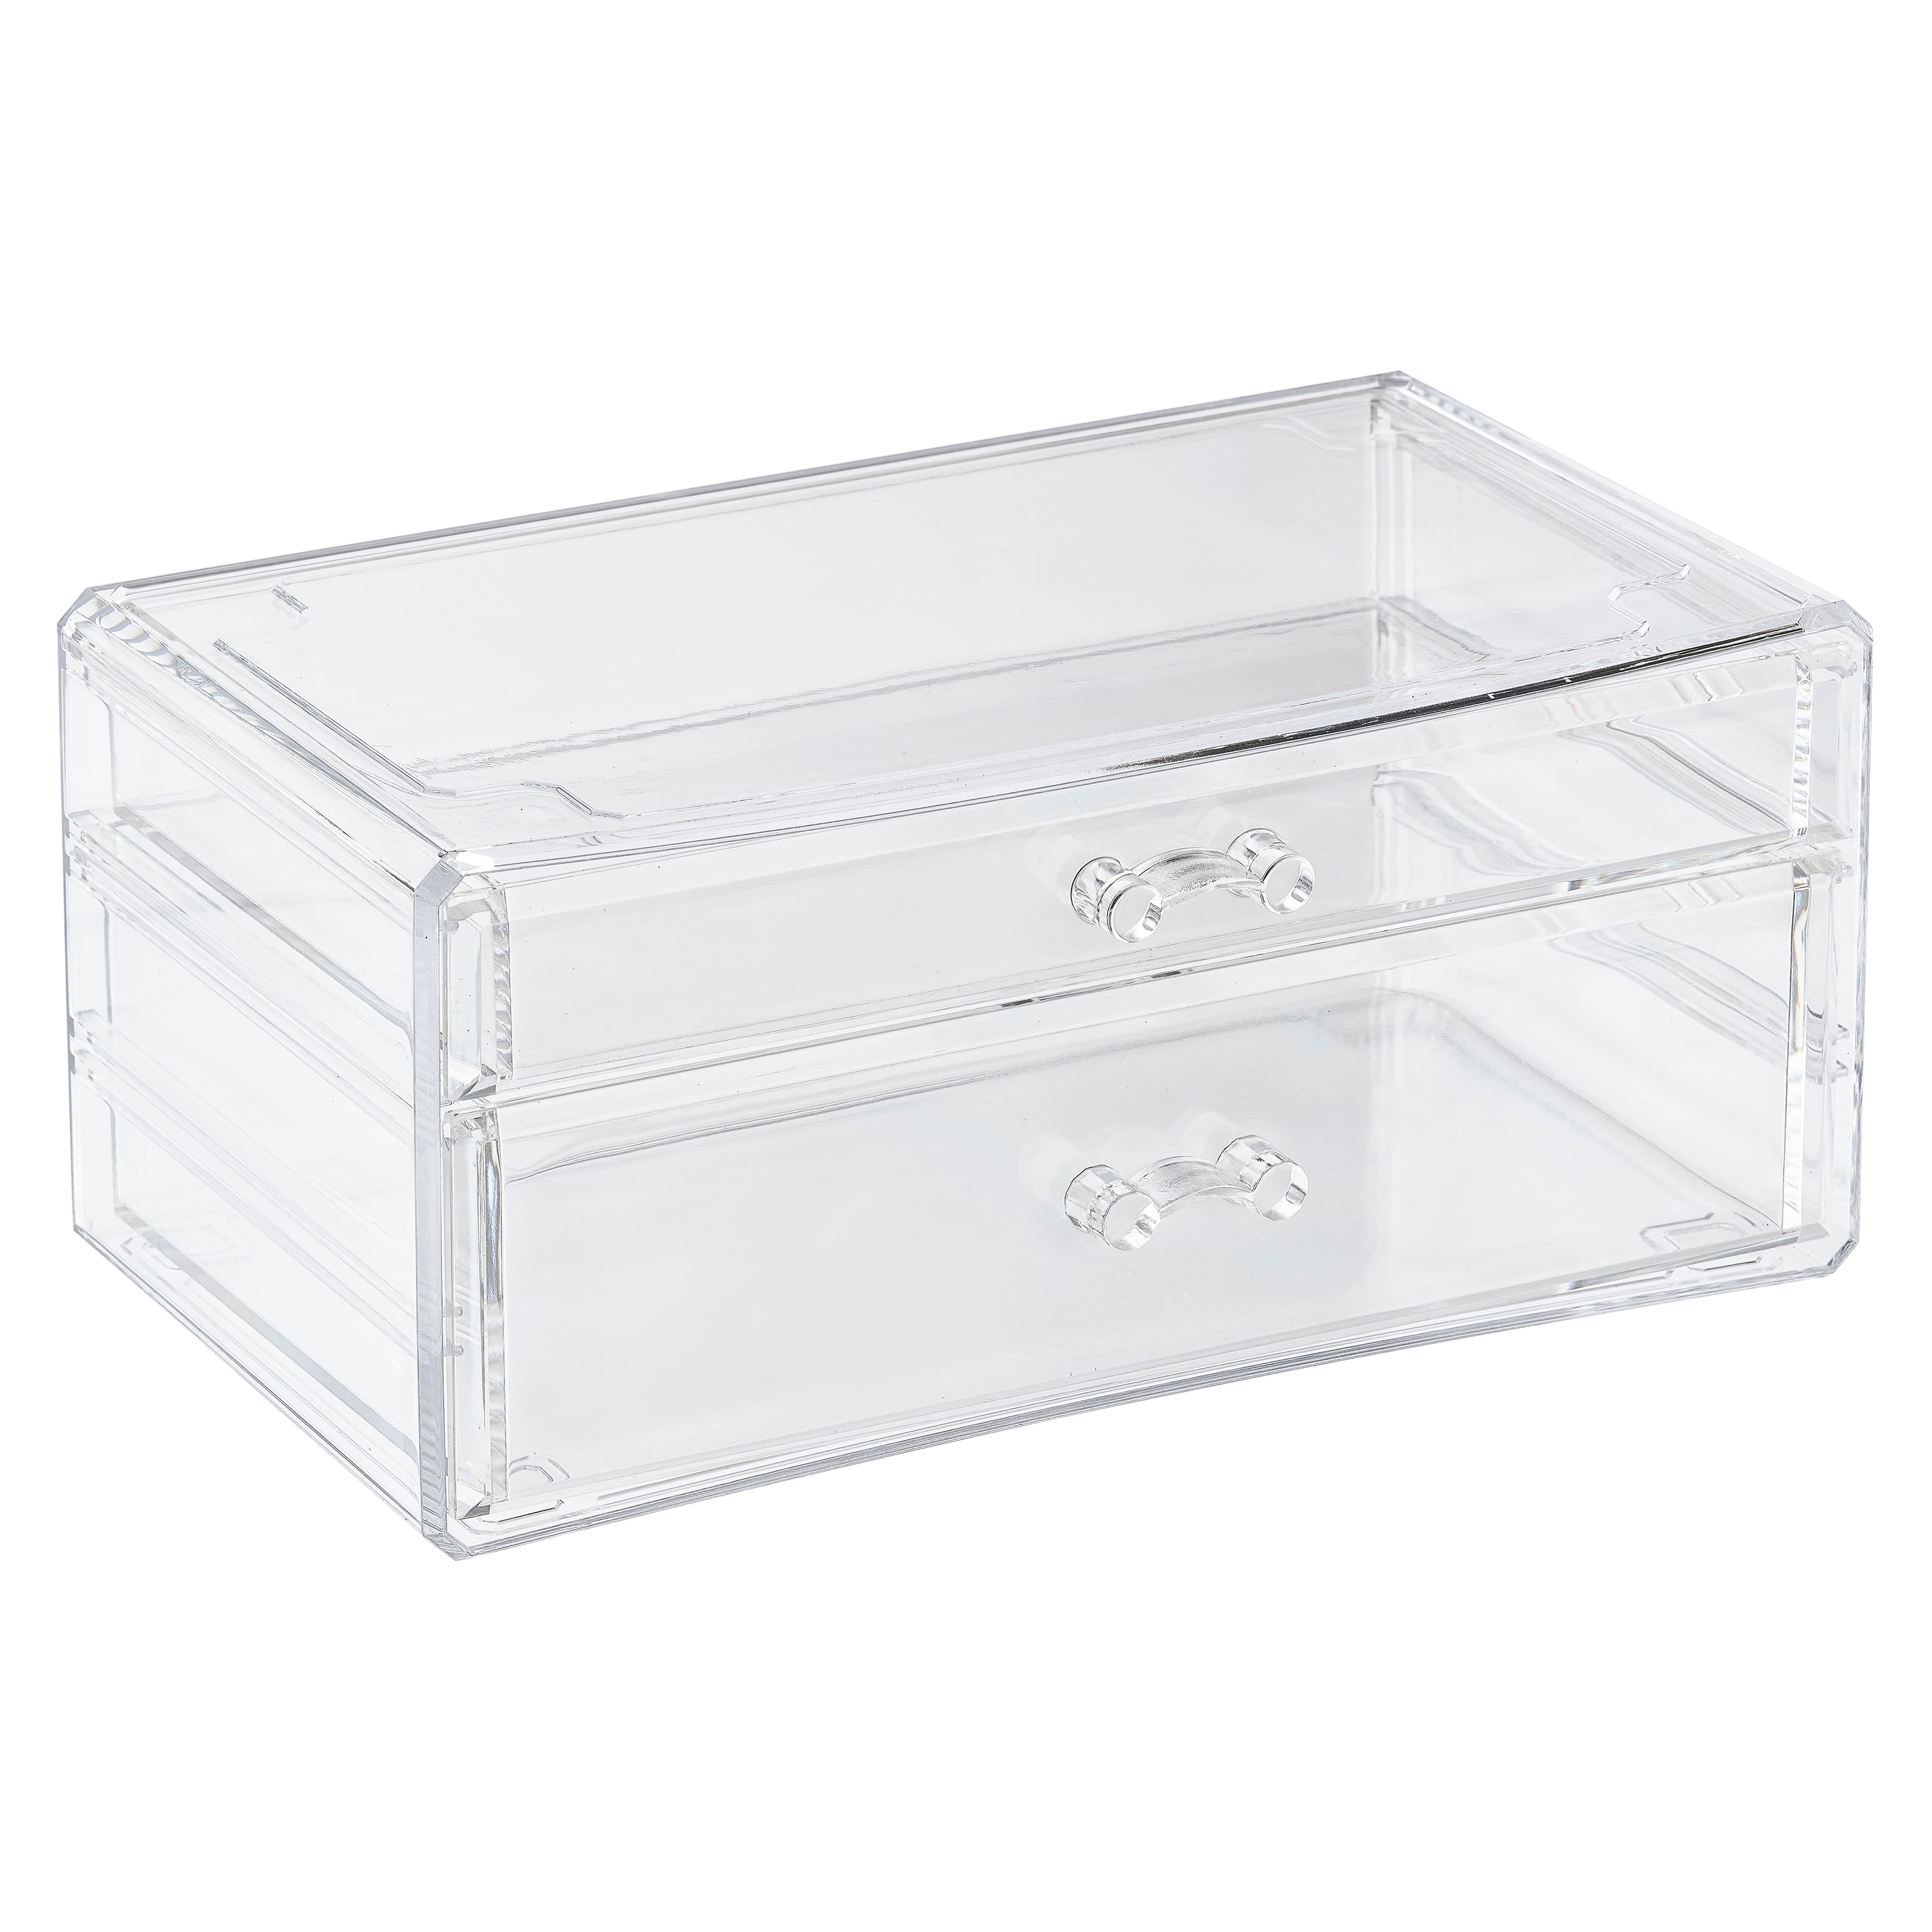 Large Adjustable Compartment Bead Storage Box with Handle by Bead